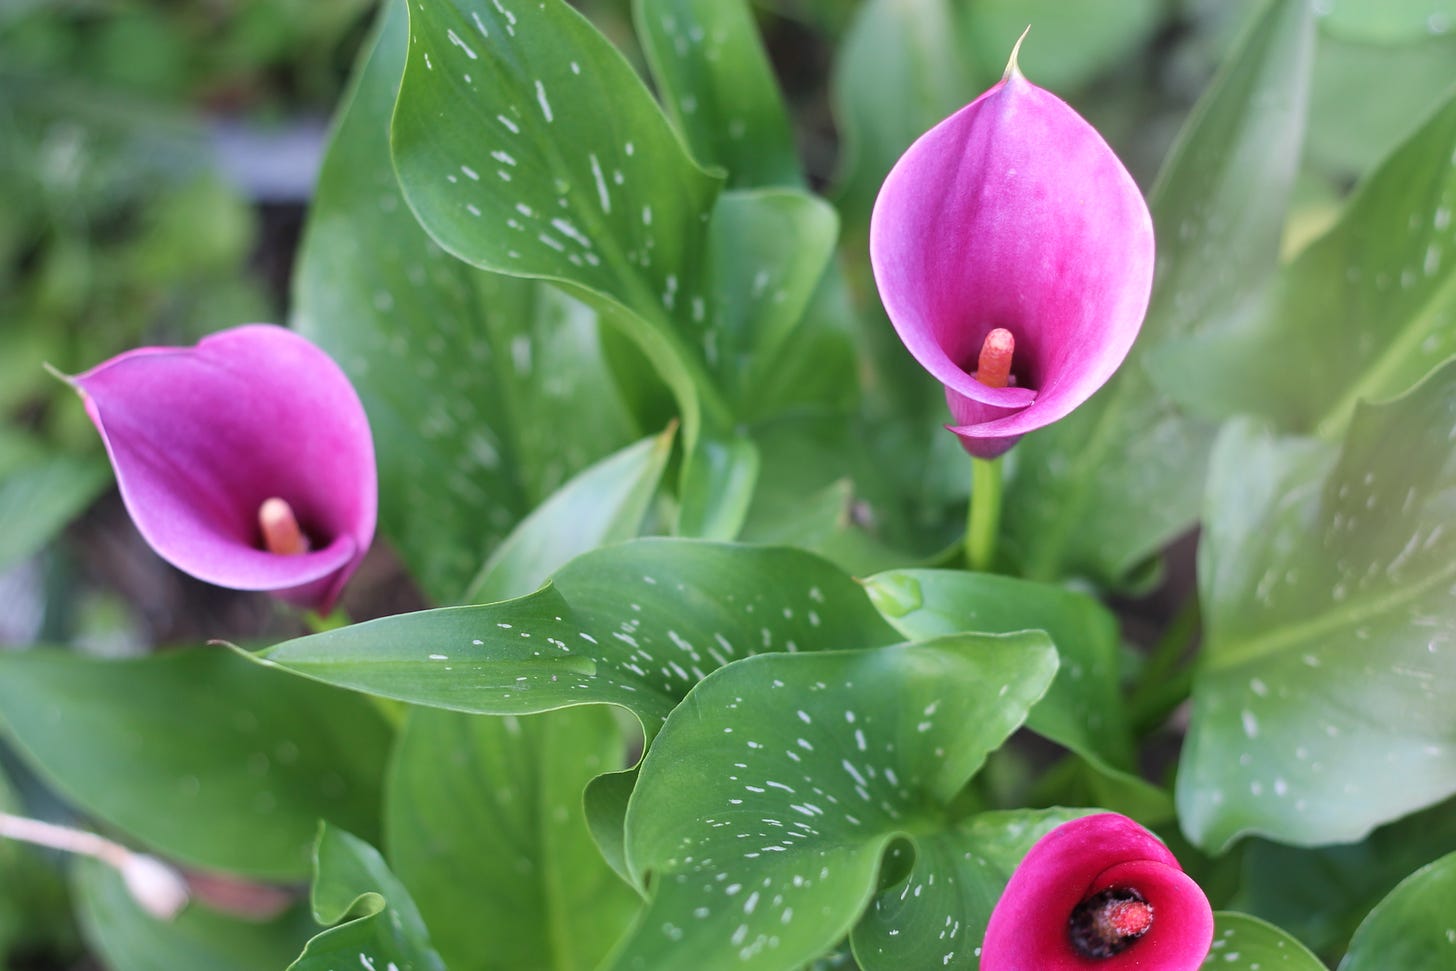 Closeup of three magenta calla lily blooms and some of the green foliage, which is tapered and speckled with white dots.